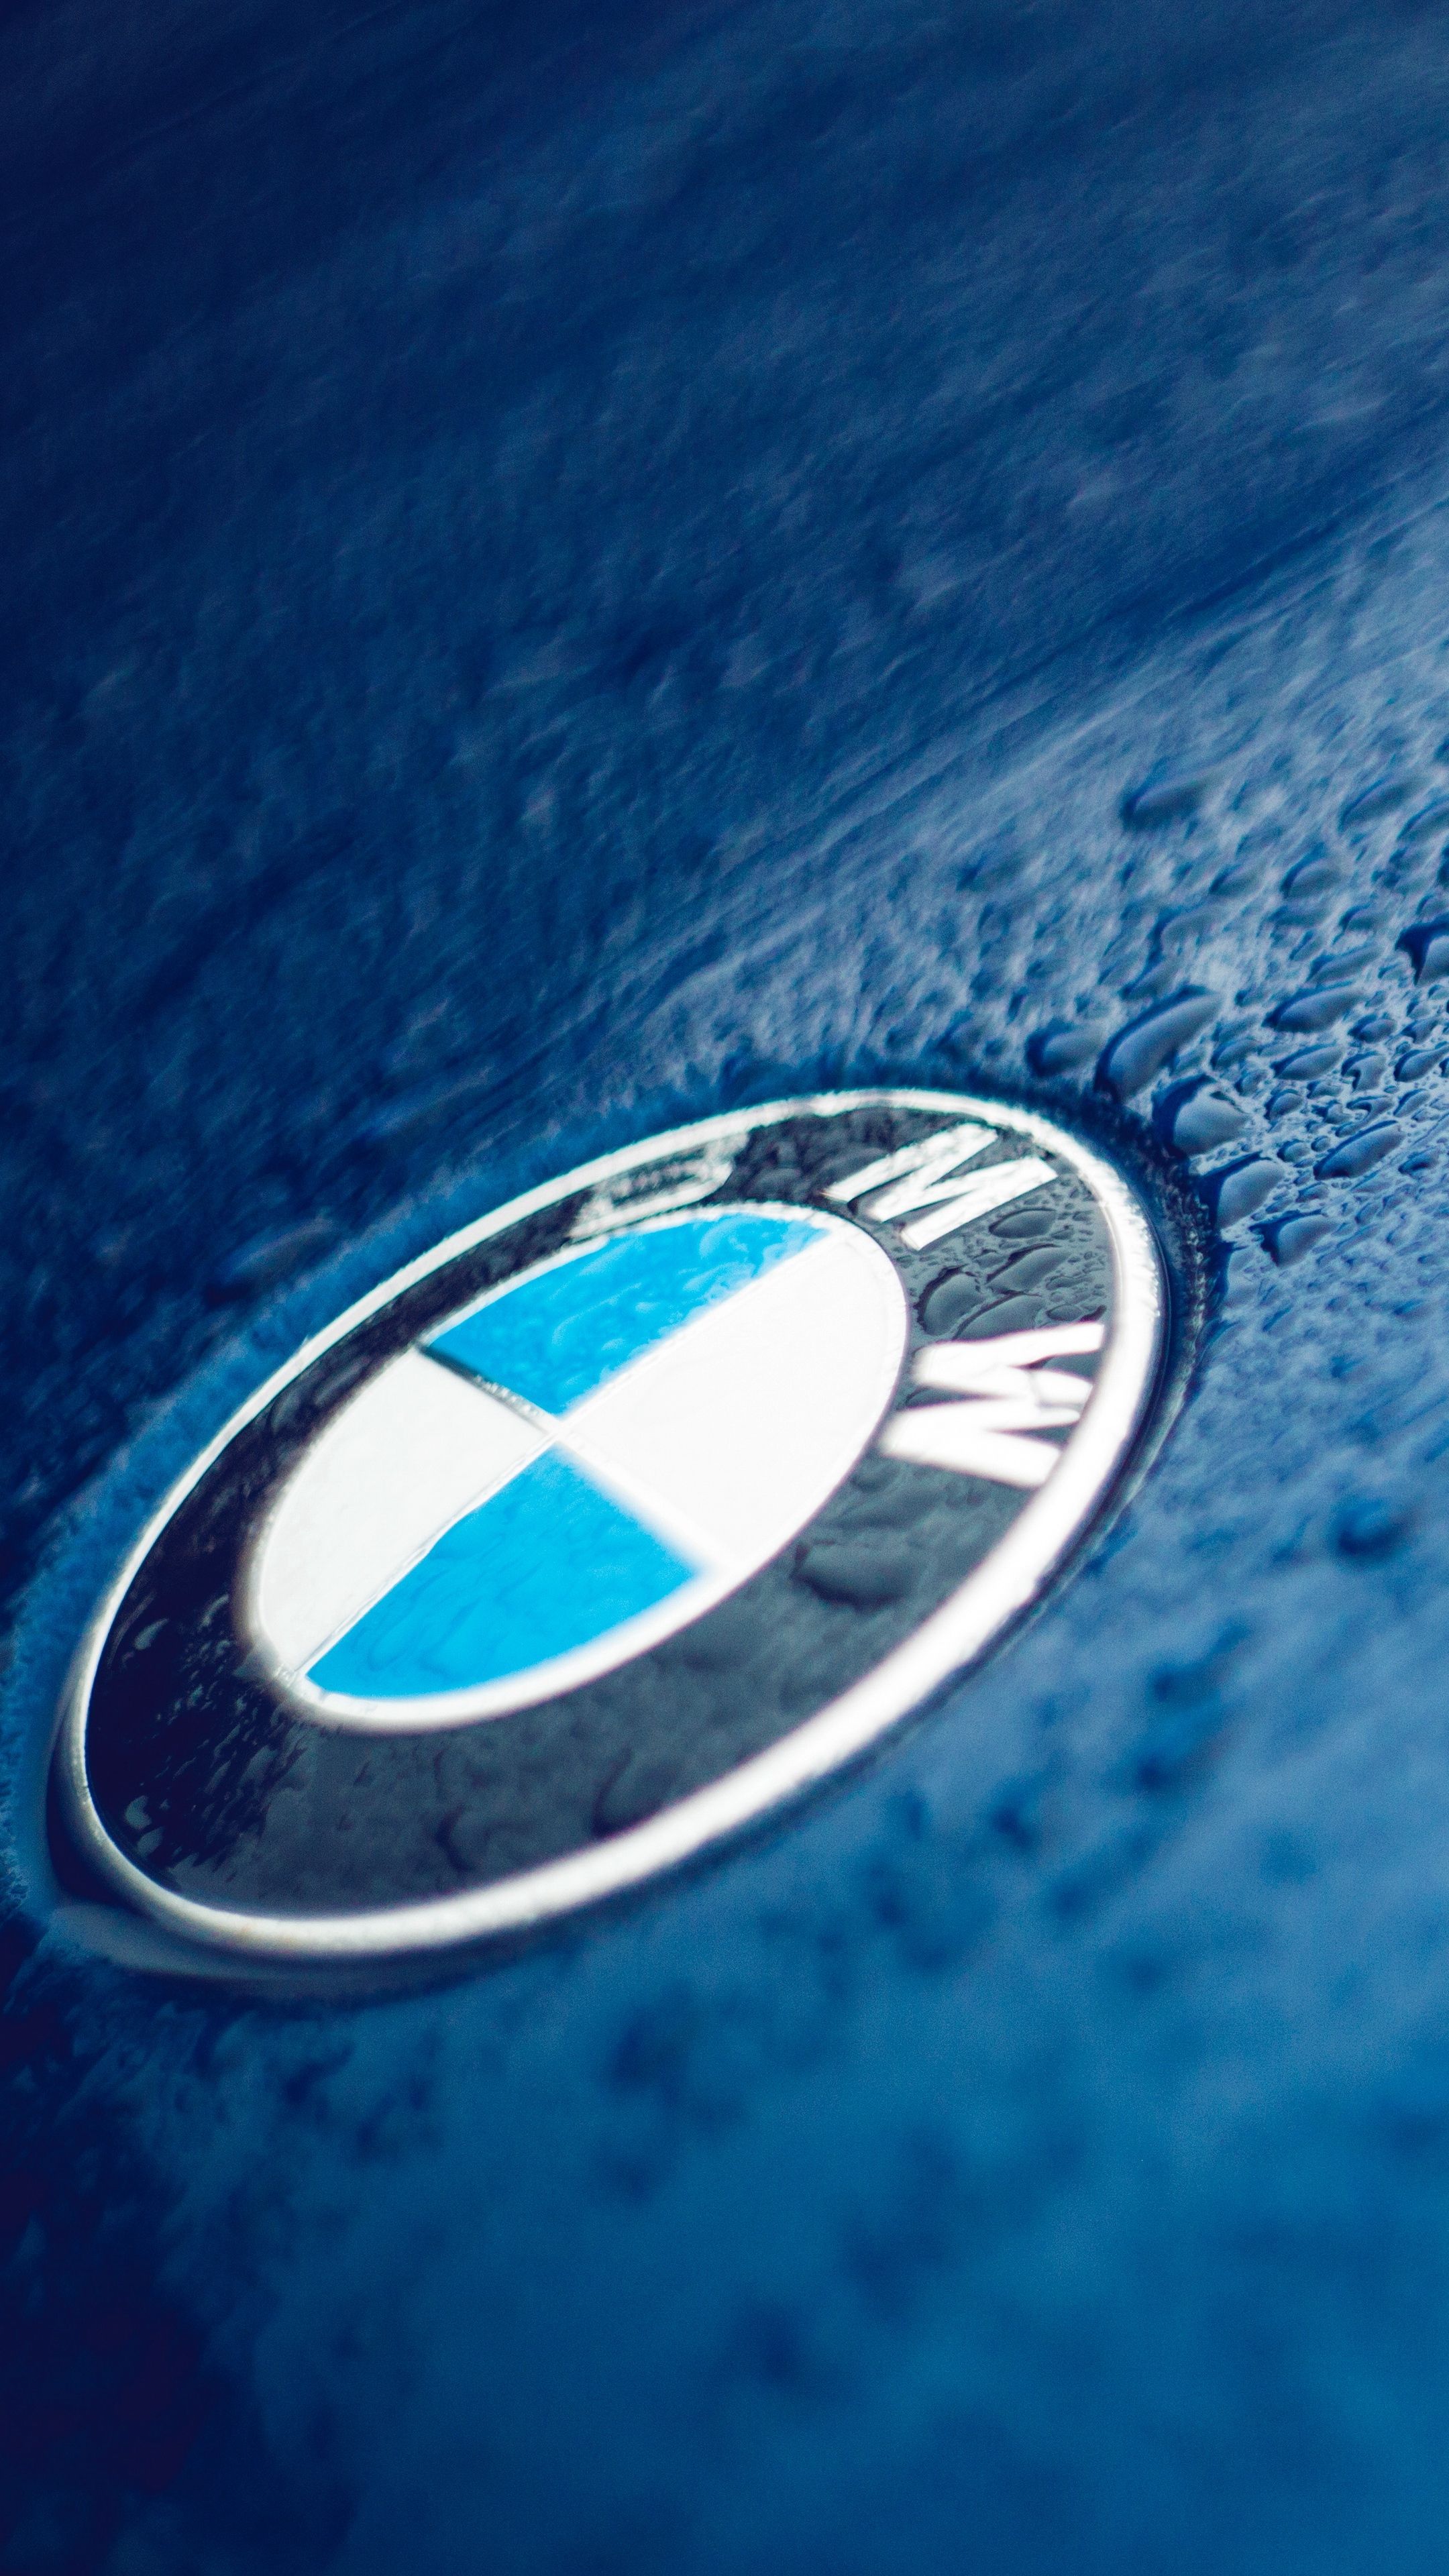 HD Android Bmw Wallpaper On